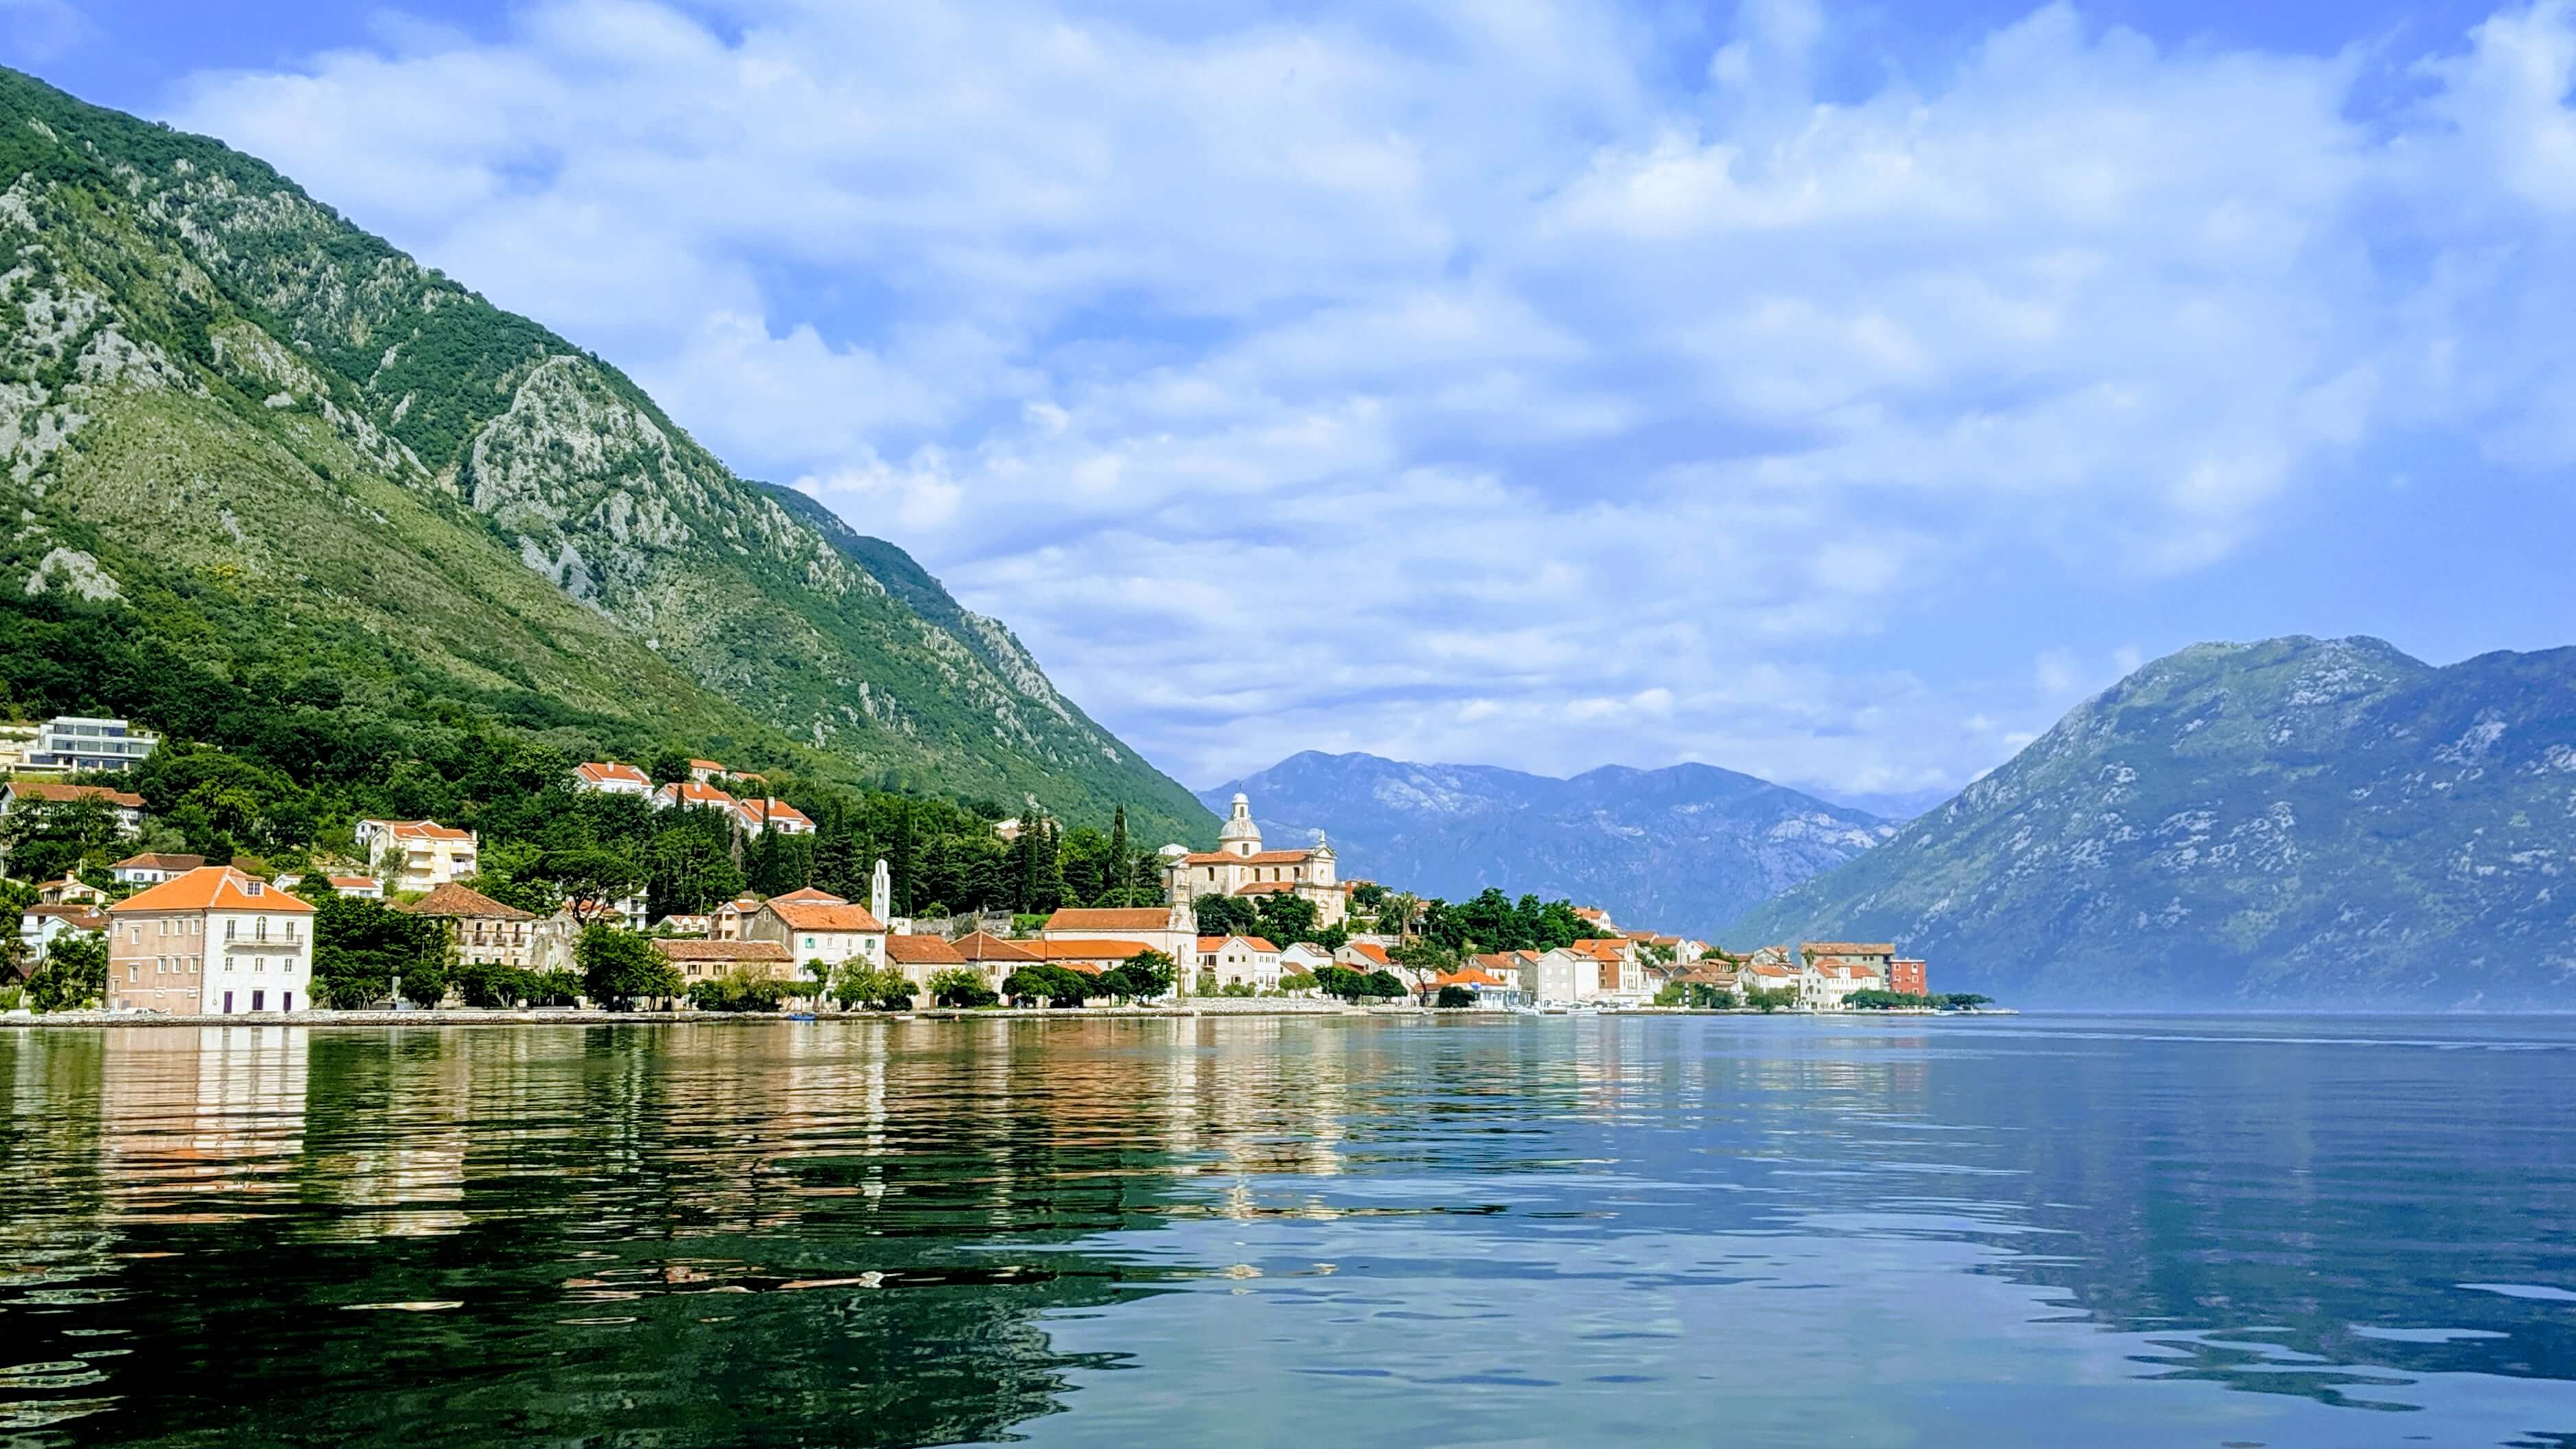 A reflection of a medieval town on Kotor Bay.